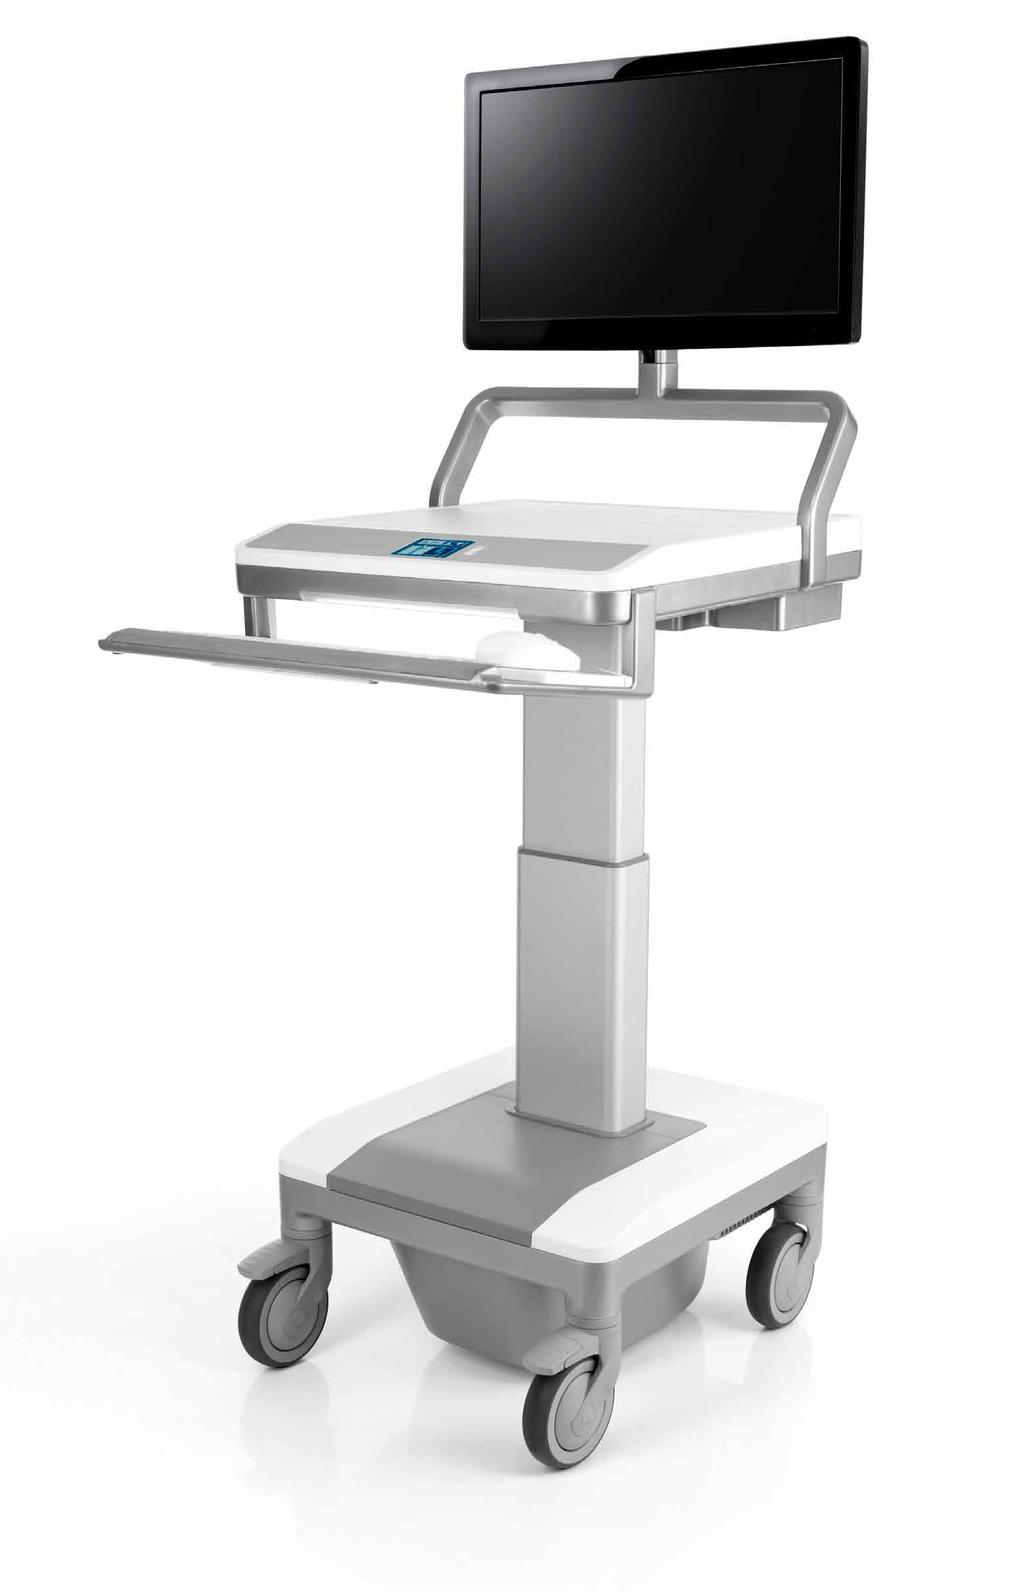 Humanscale s TouchPoint line of mobile technology carts addresses all of the technology challenges present in today s healthcare environment.